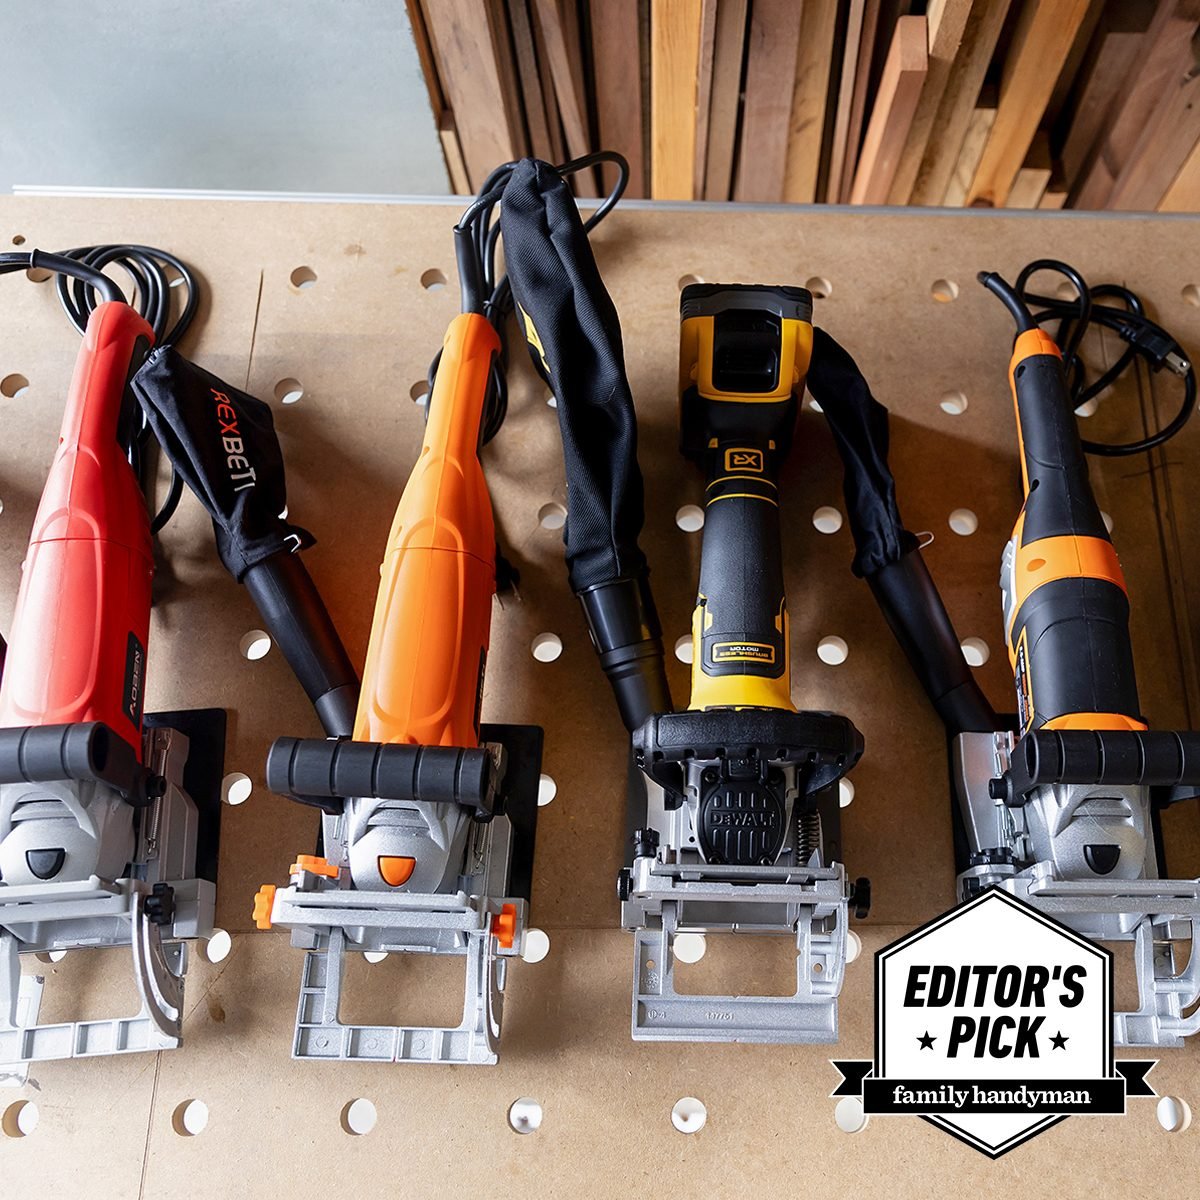 5 Must-Have Woodworking Tools for Every Advanced Carpenter - The Joinery  Plans Blog